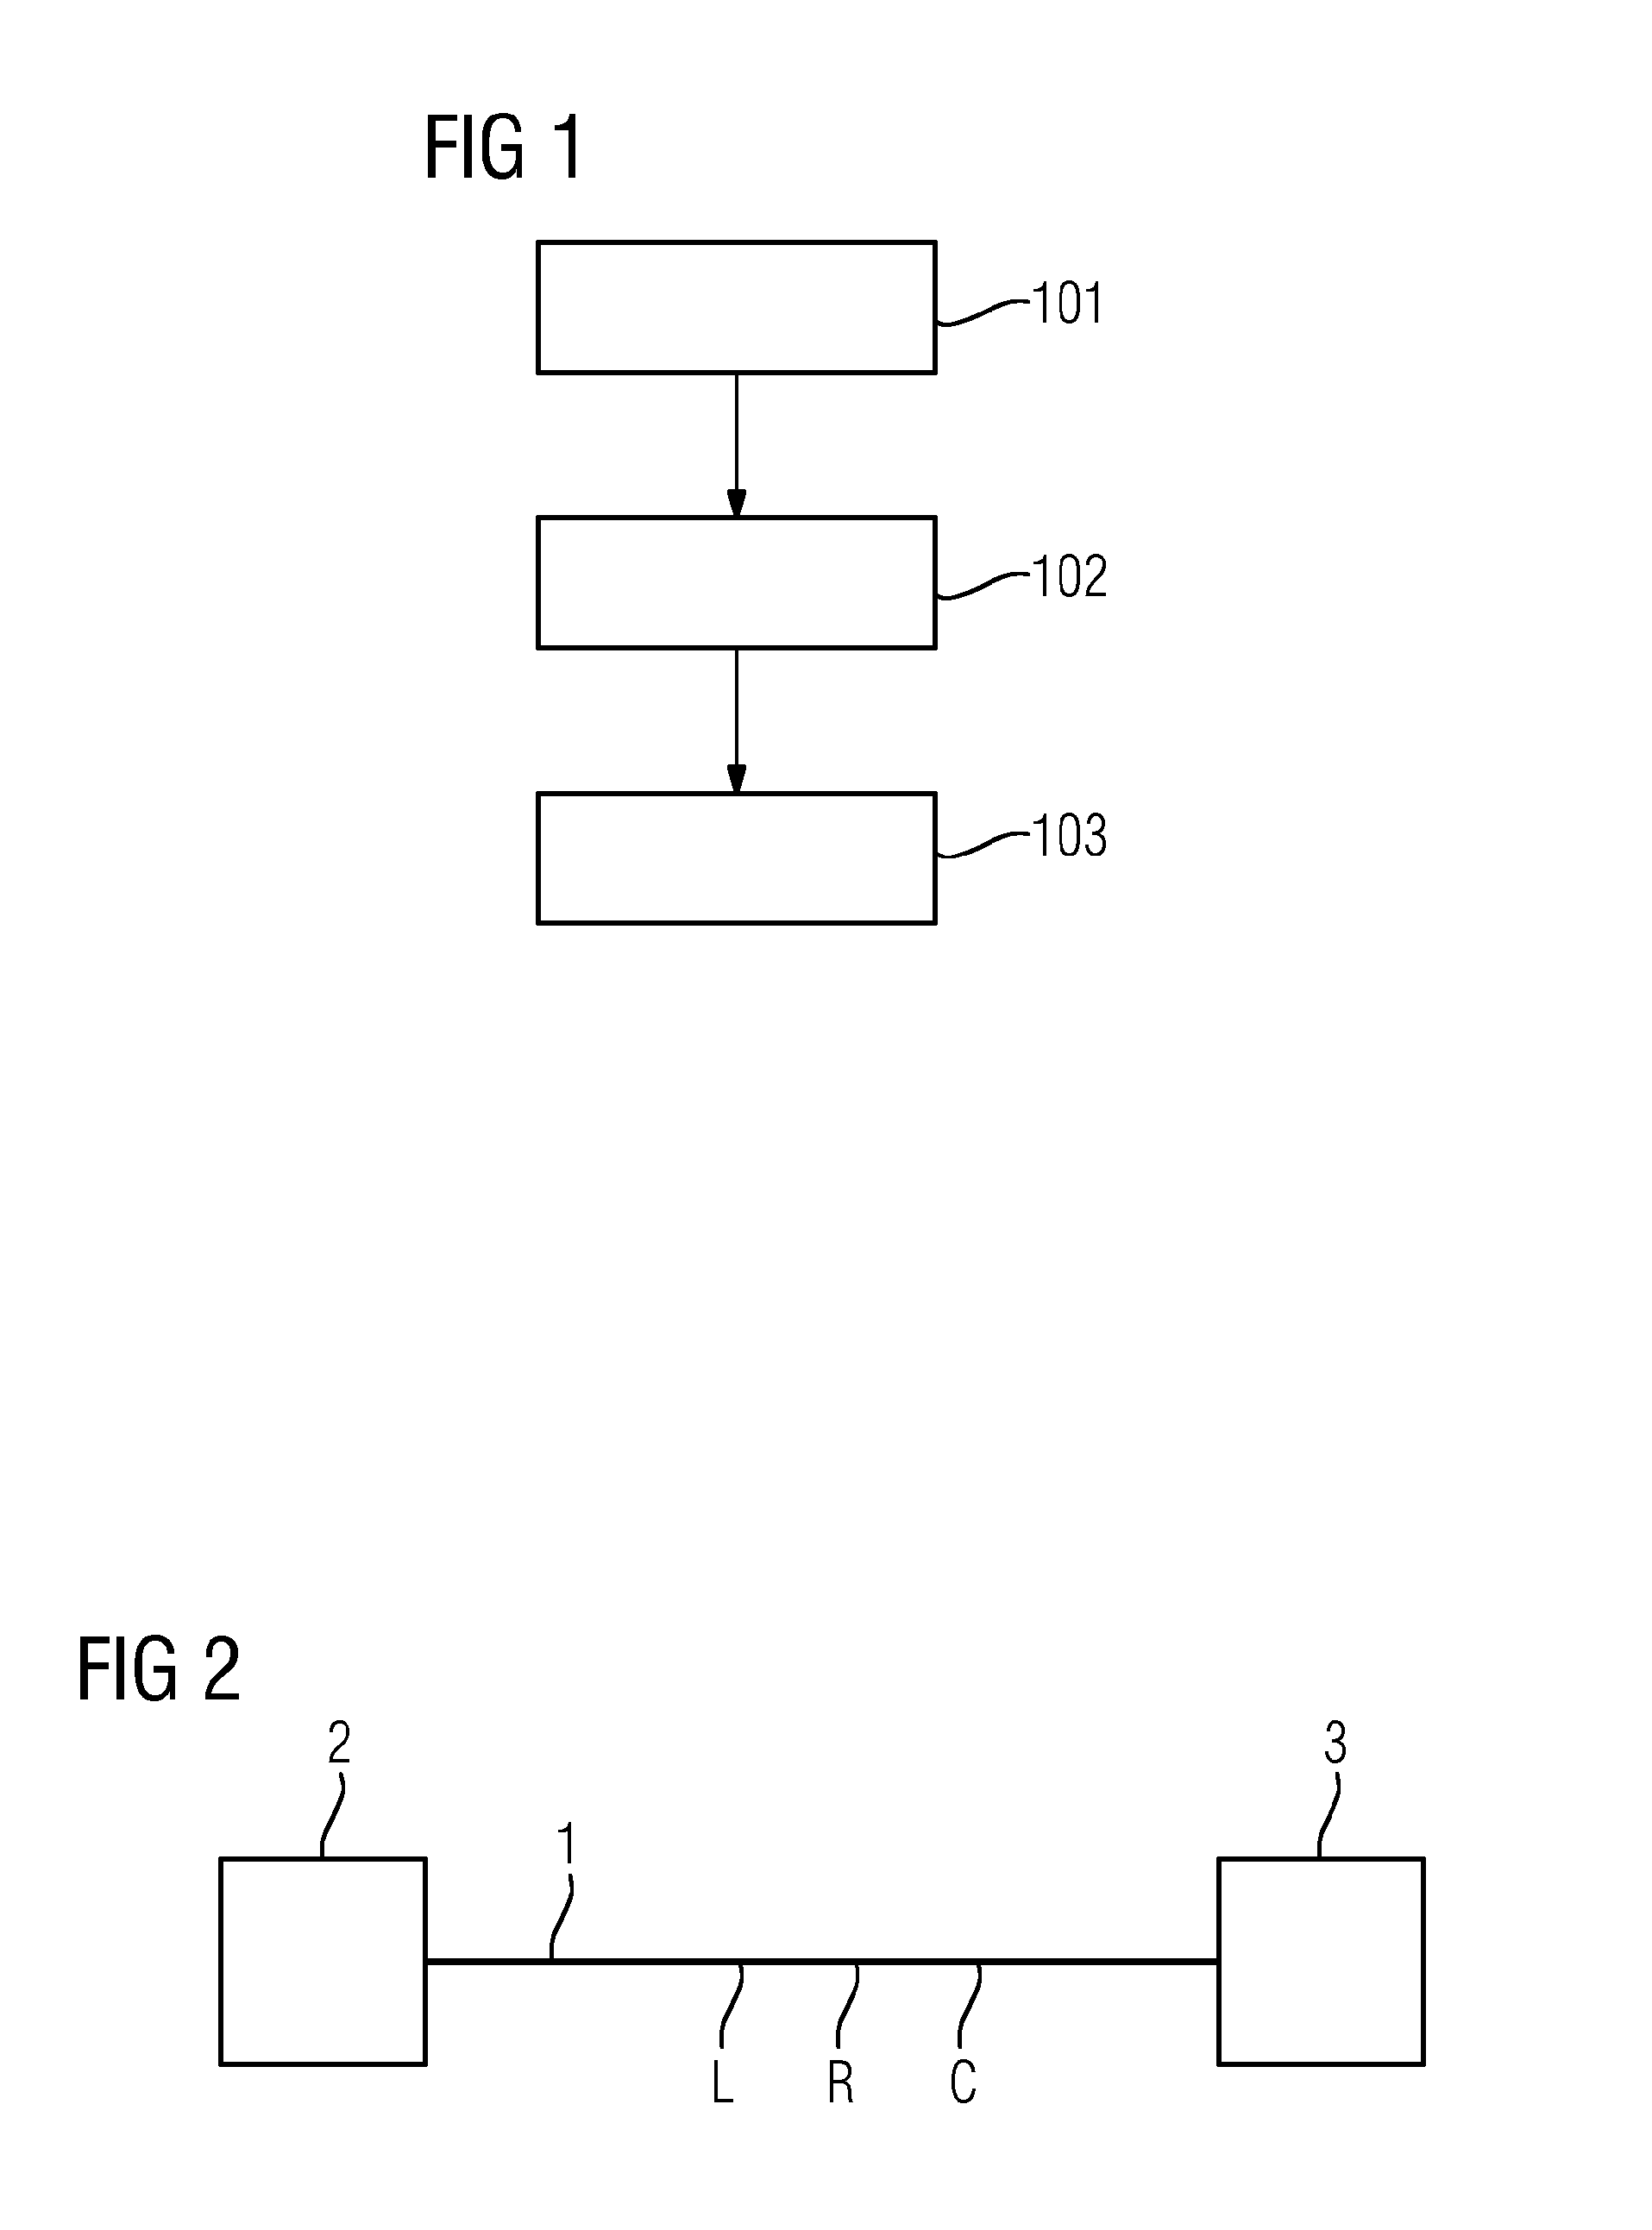 Method and Apparatus for Recognizing a Manipulation on an Electrical Line